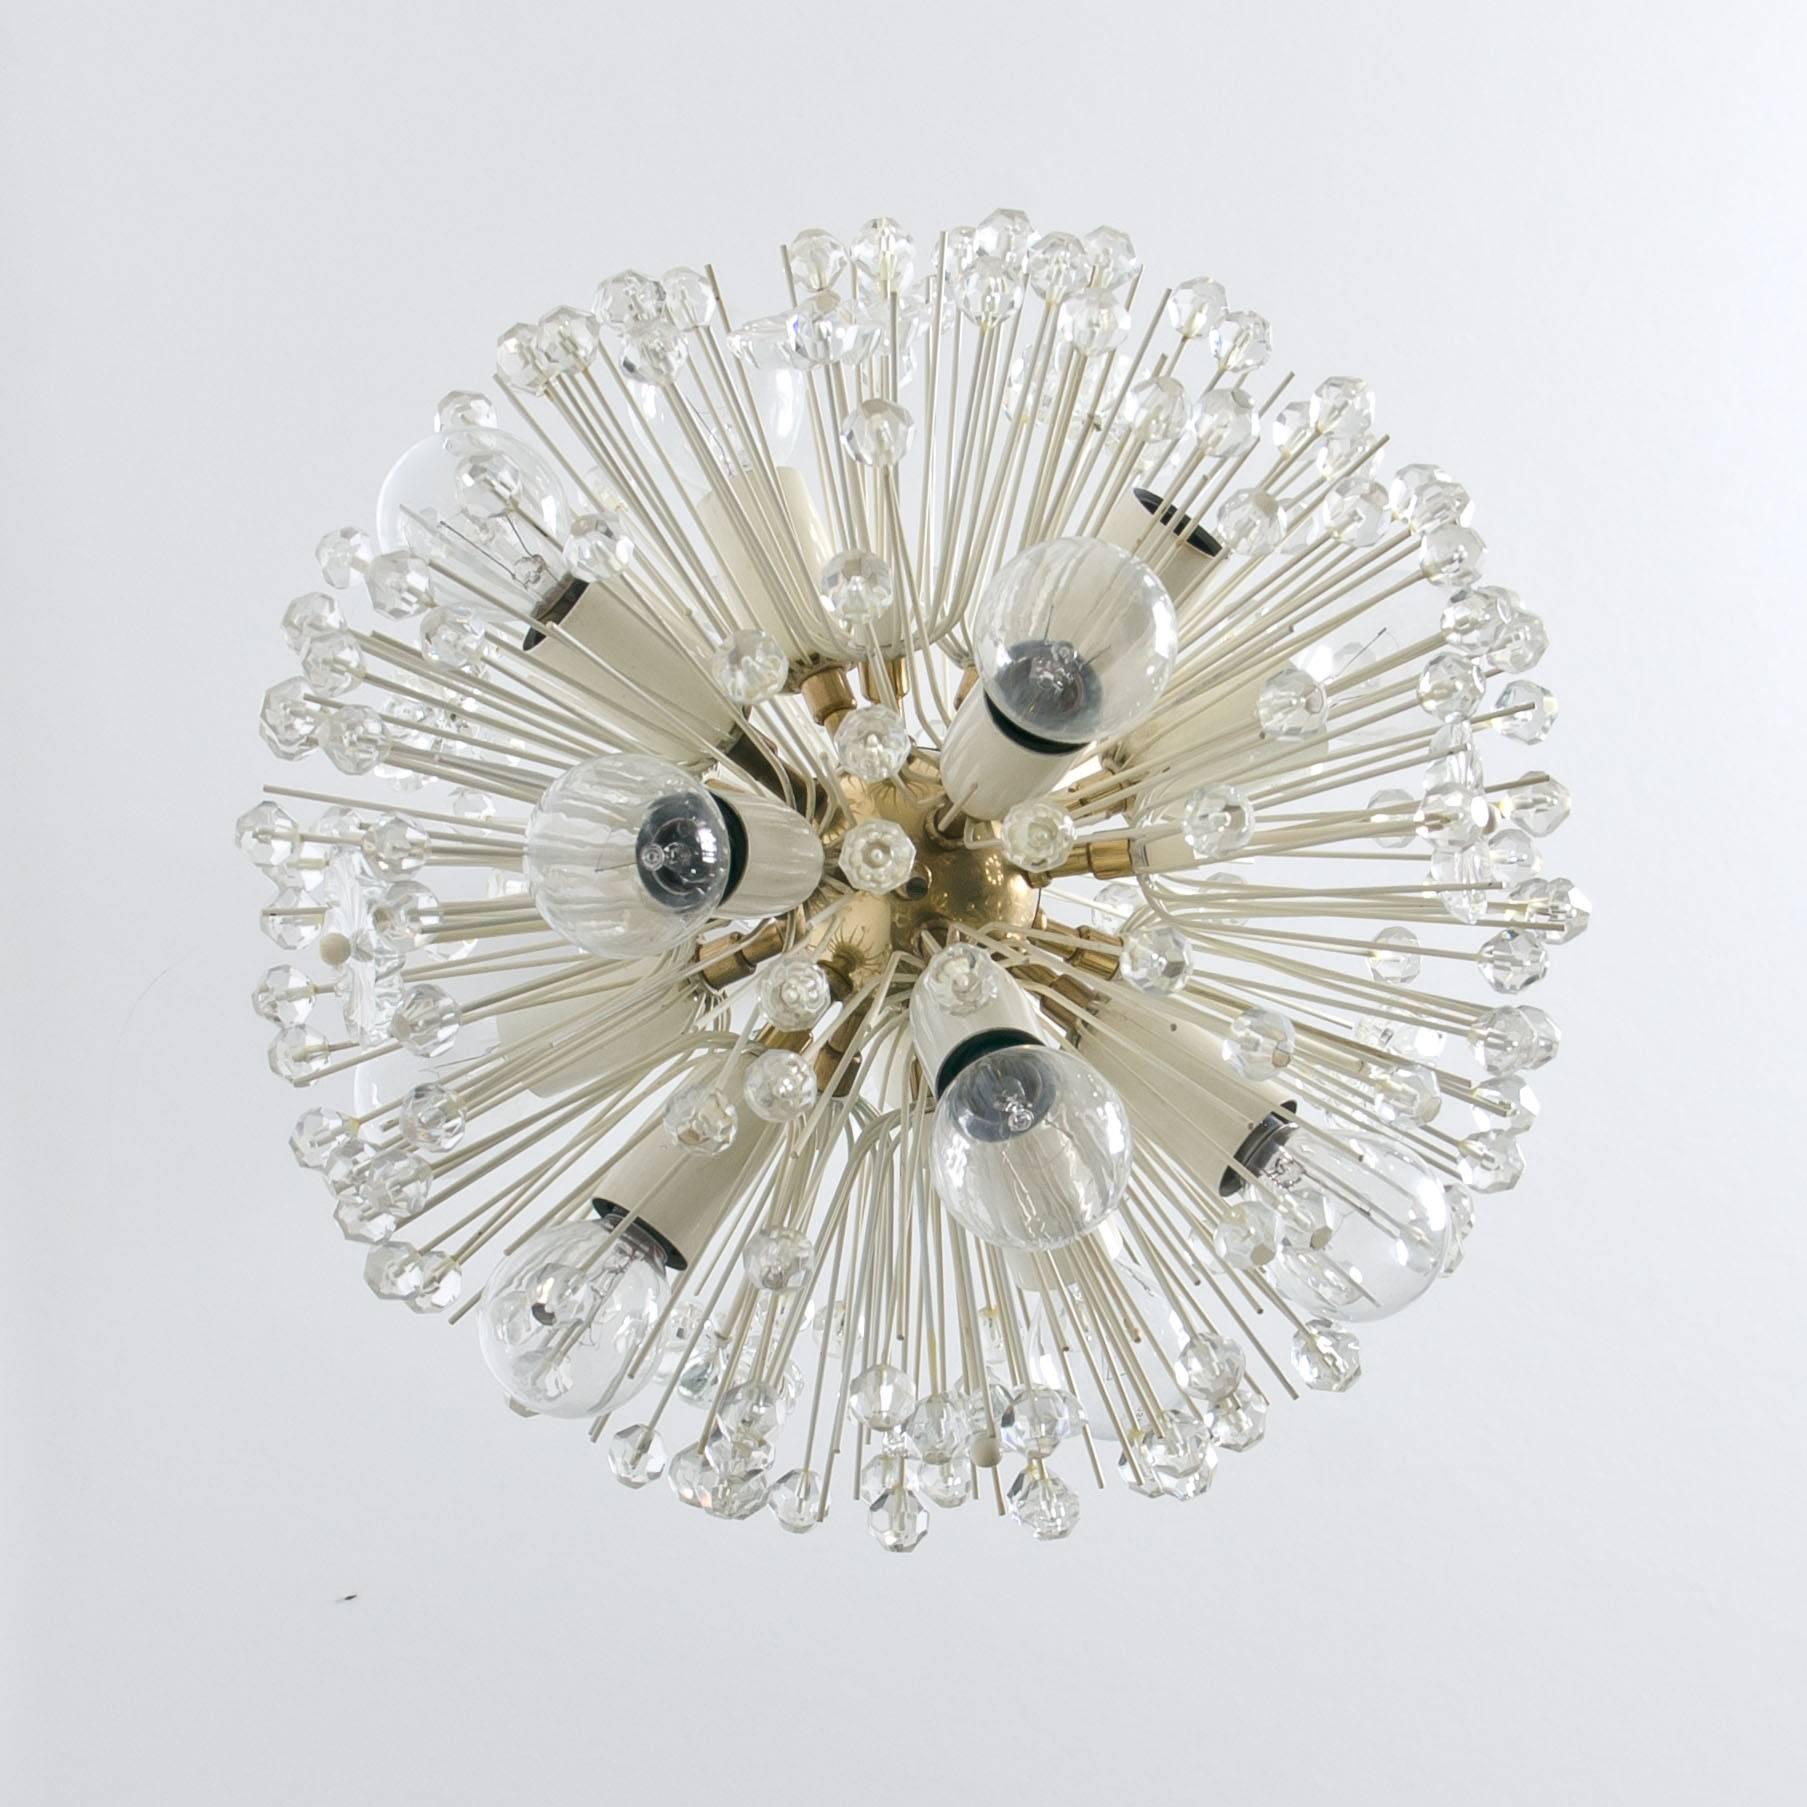 Sputnik nine-light brass fixture with copious amounts of Austrian crystals by Emil Stejnar for Nikoll. Cosmological. This glamorous delicate brass ‘Snowball’ Sputnik chandelier is also known as ‘pusteblume’, or ‘snowflake’ and is made in Vienna